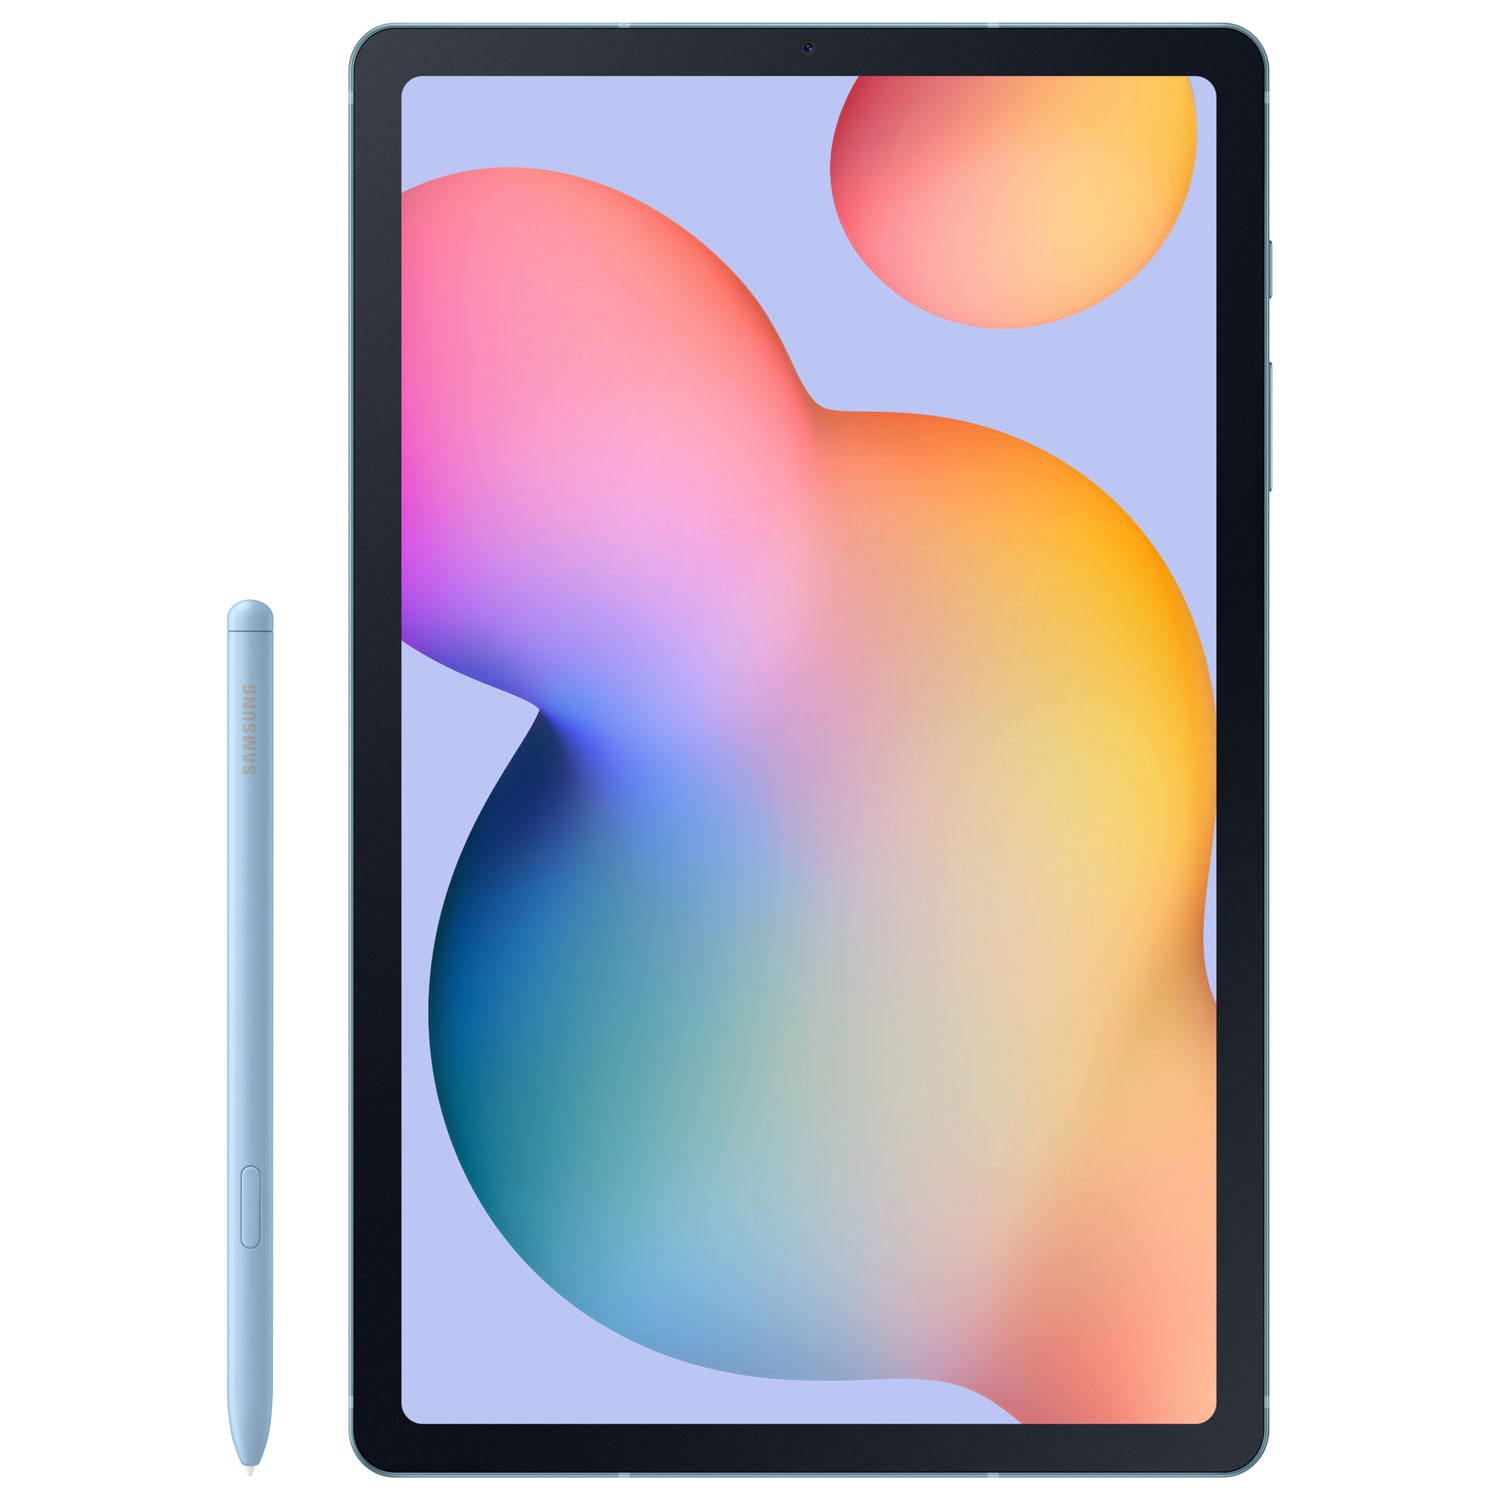 Samsung Galaxy Tab S6 Lite 10.4" 64GB Android 12 Tablet with Snapdragon 720G 8-Core Processor - Blue